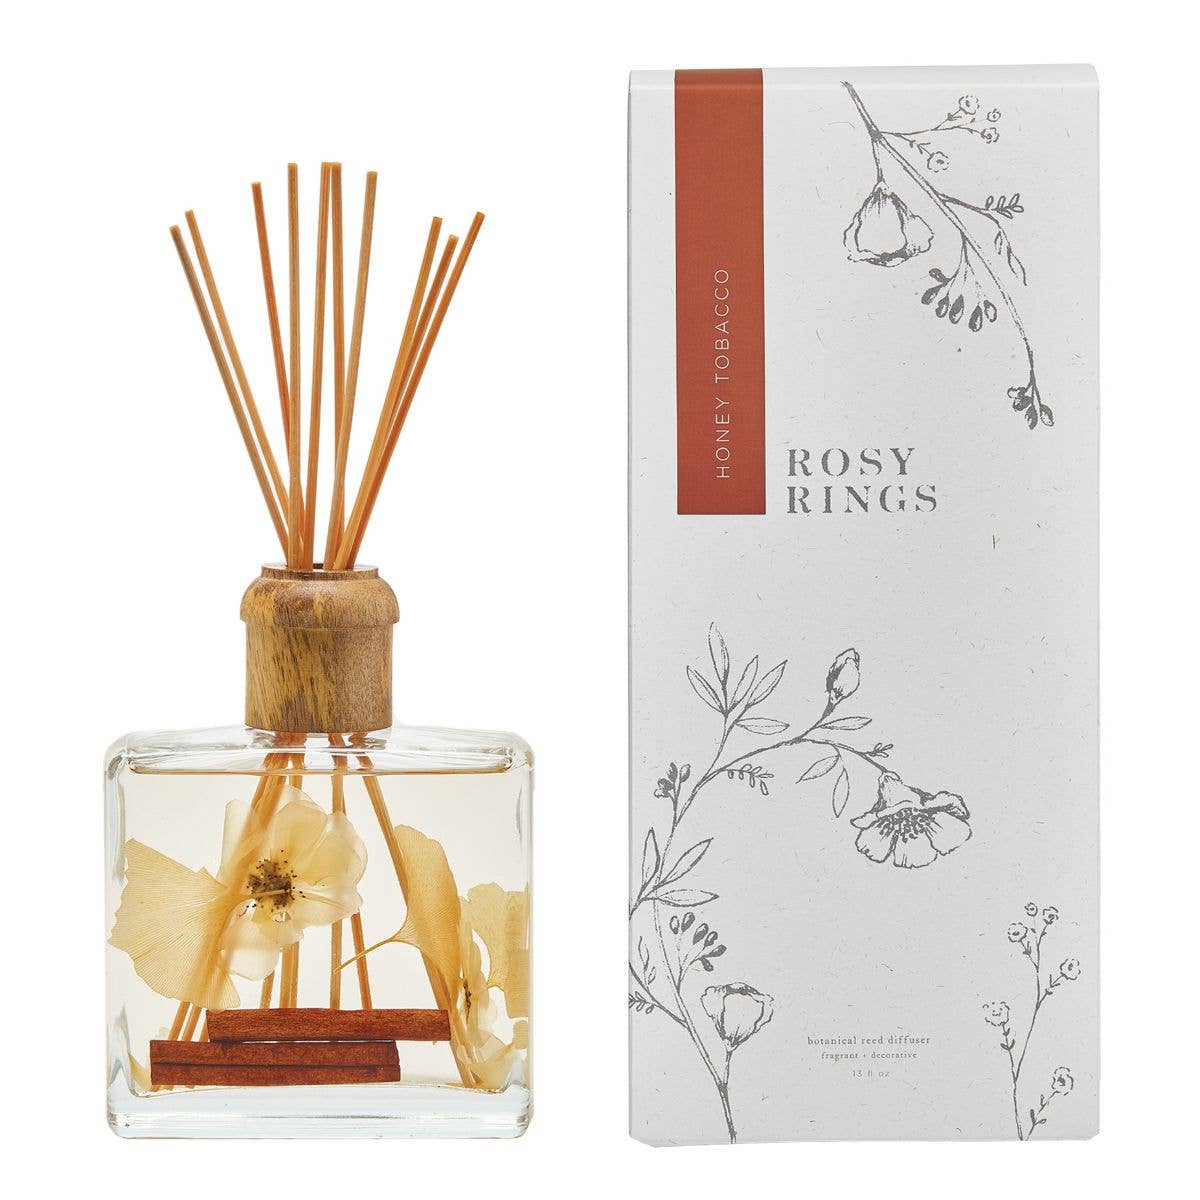 Rosy Rings - Honey Tobacco Botanical Reed Diffuser